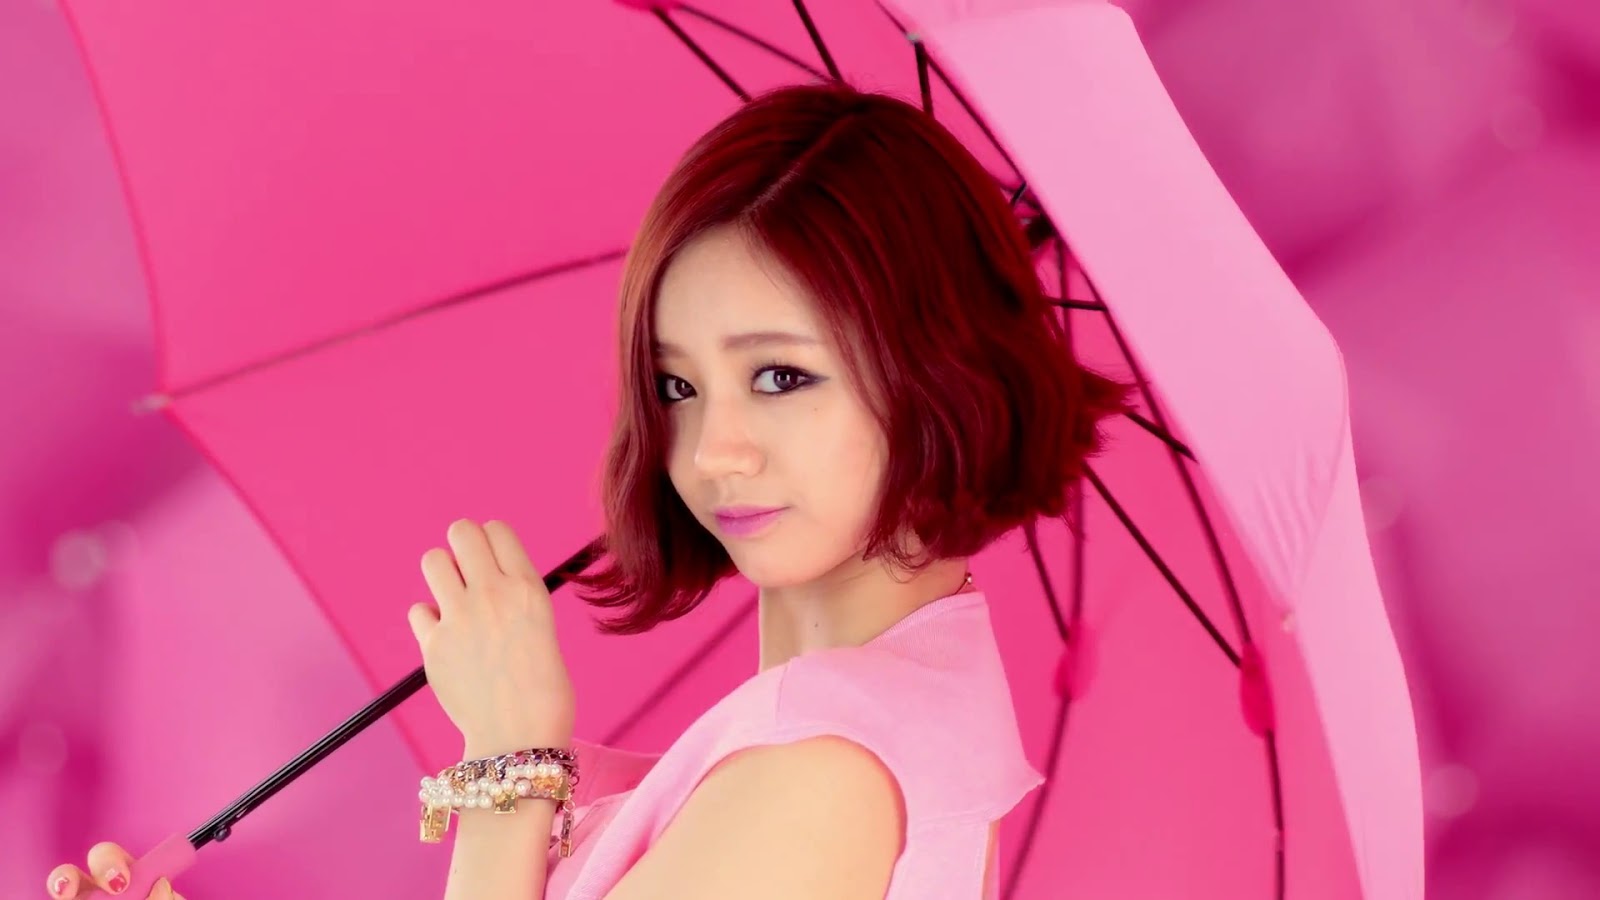 Lee Hyeri Image HD Wallpaper And Background Photos